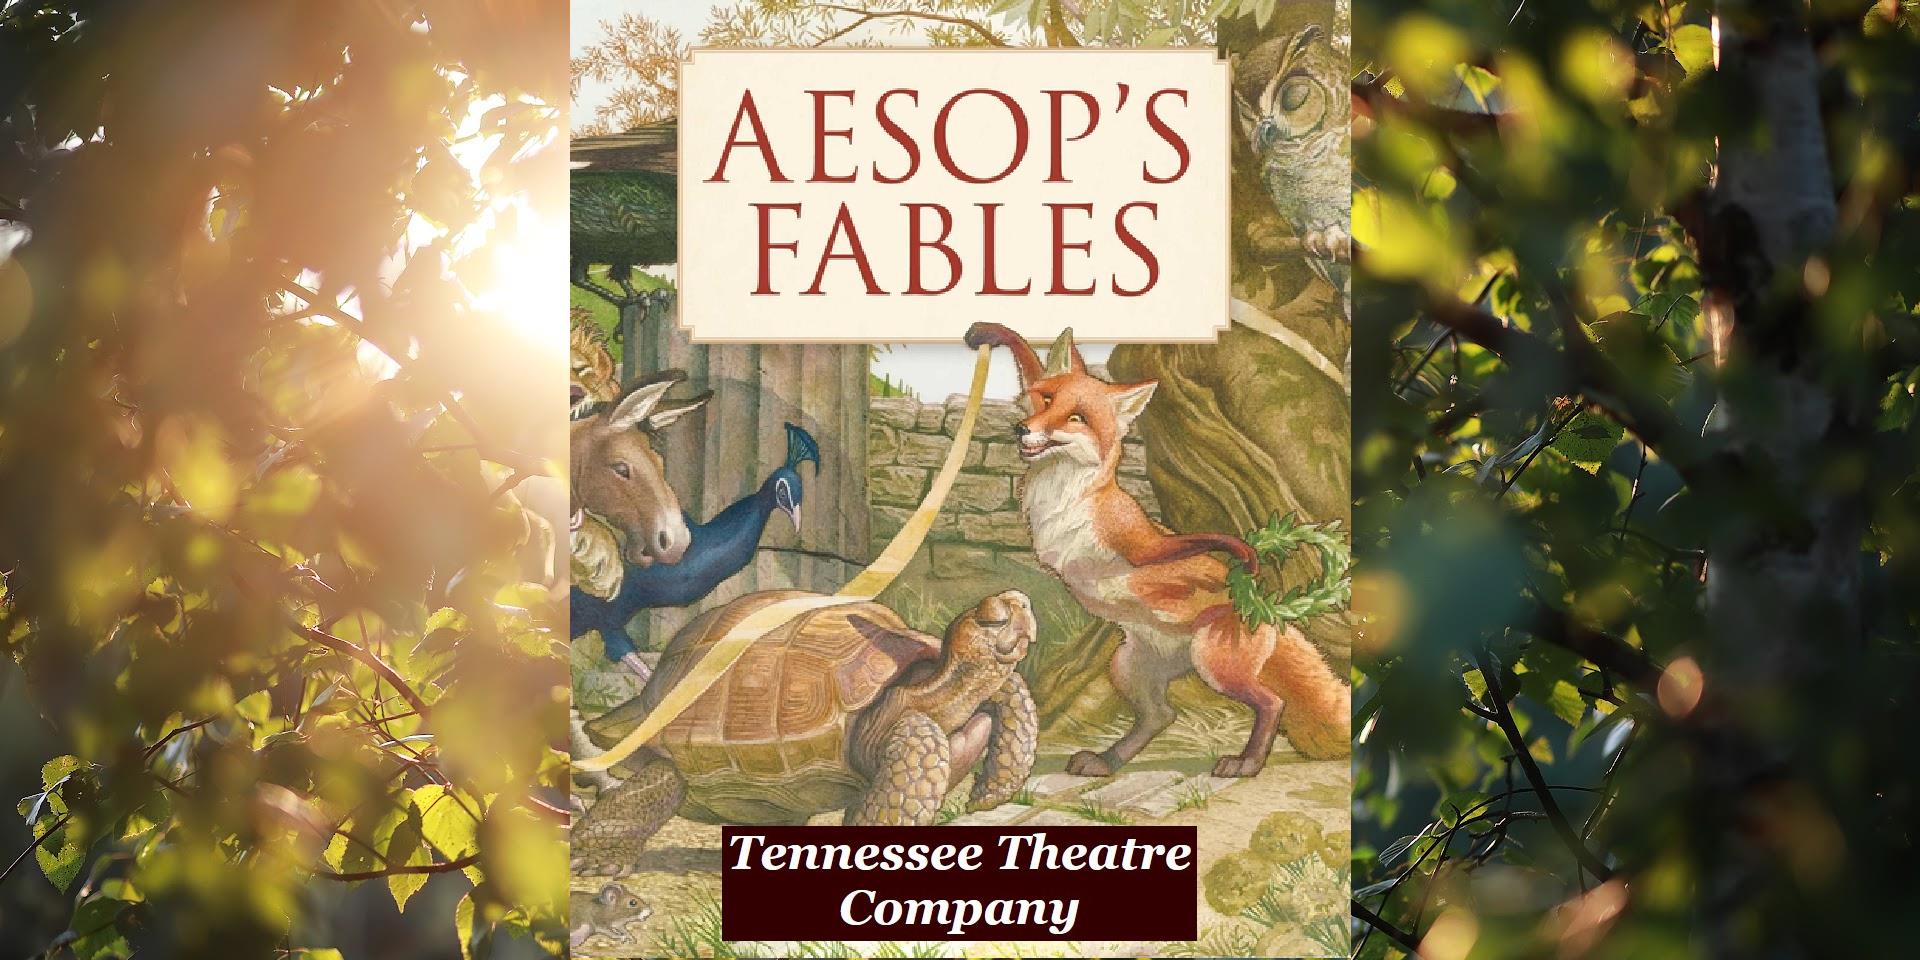 Aesop's Fable - Tennessee Theatre Company